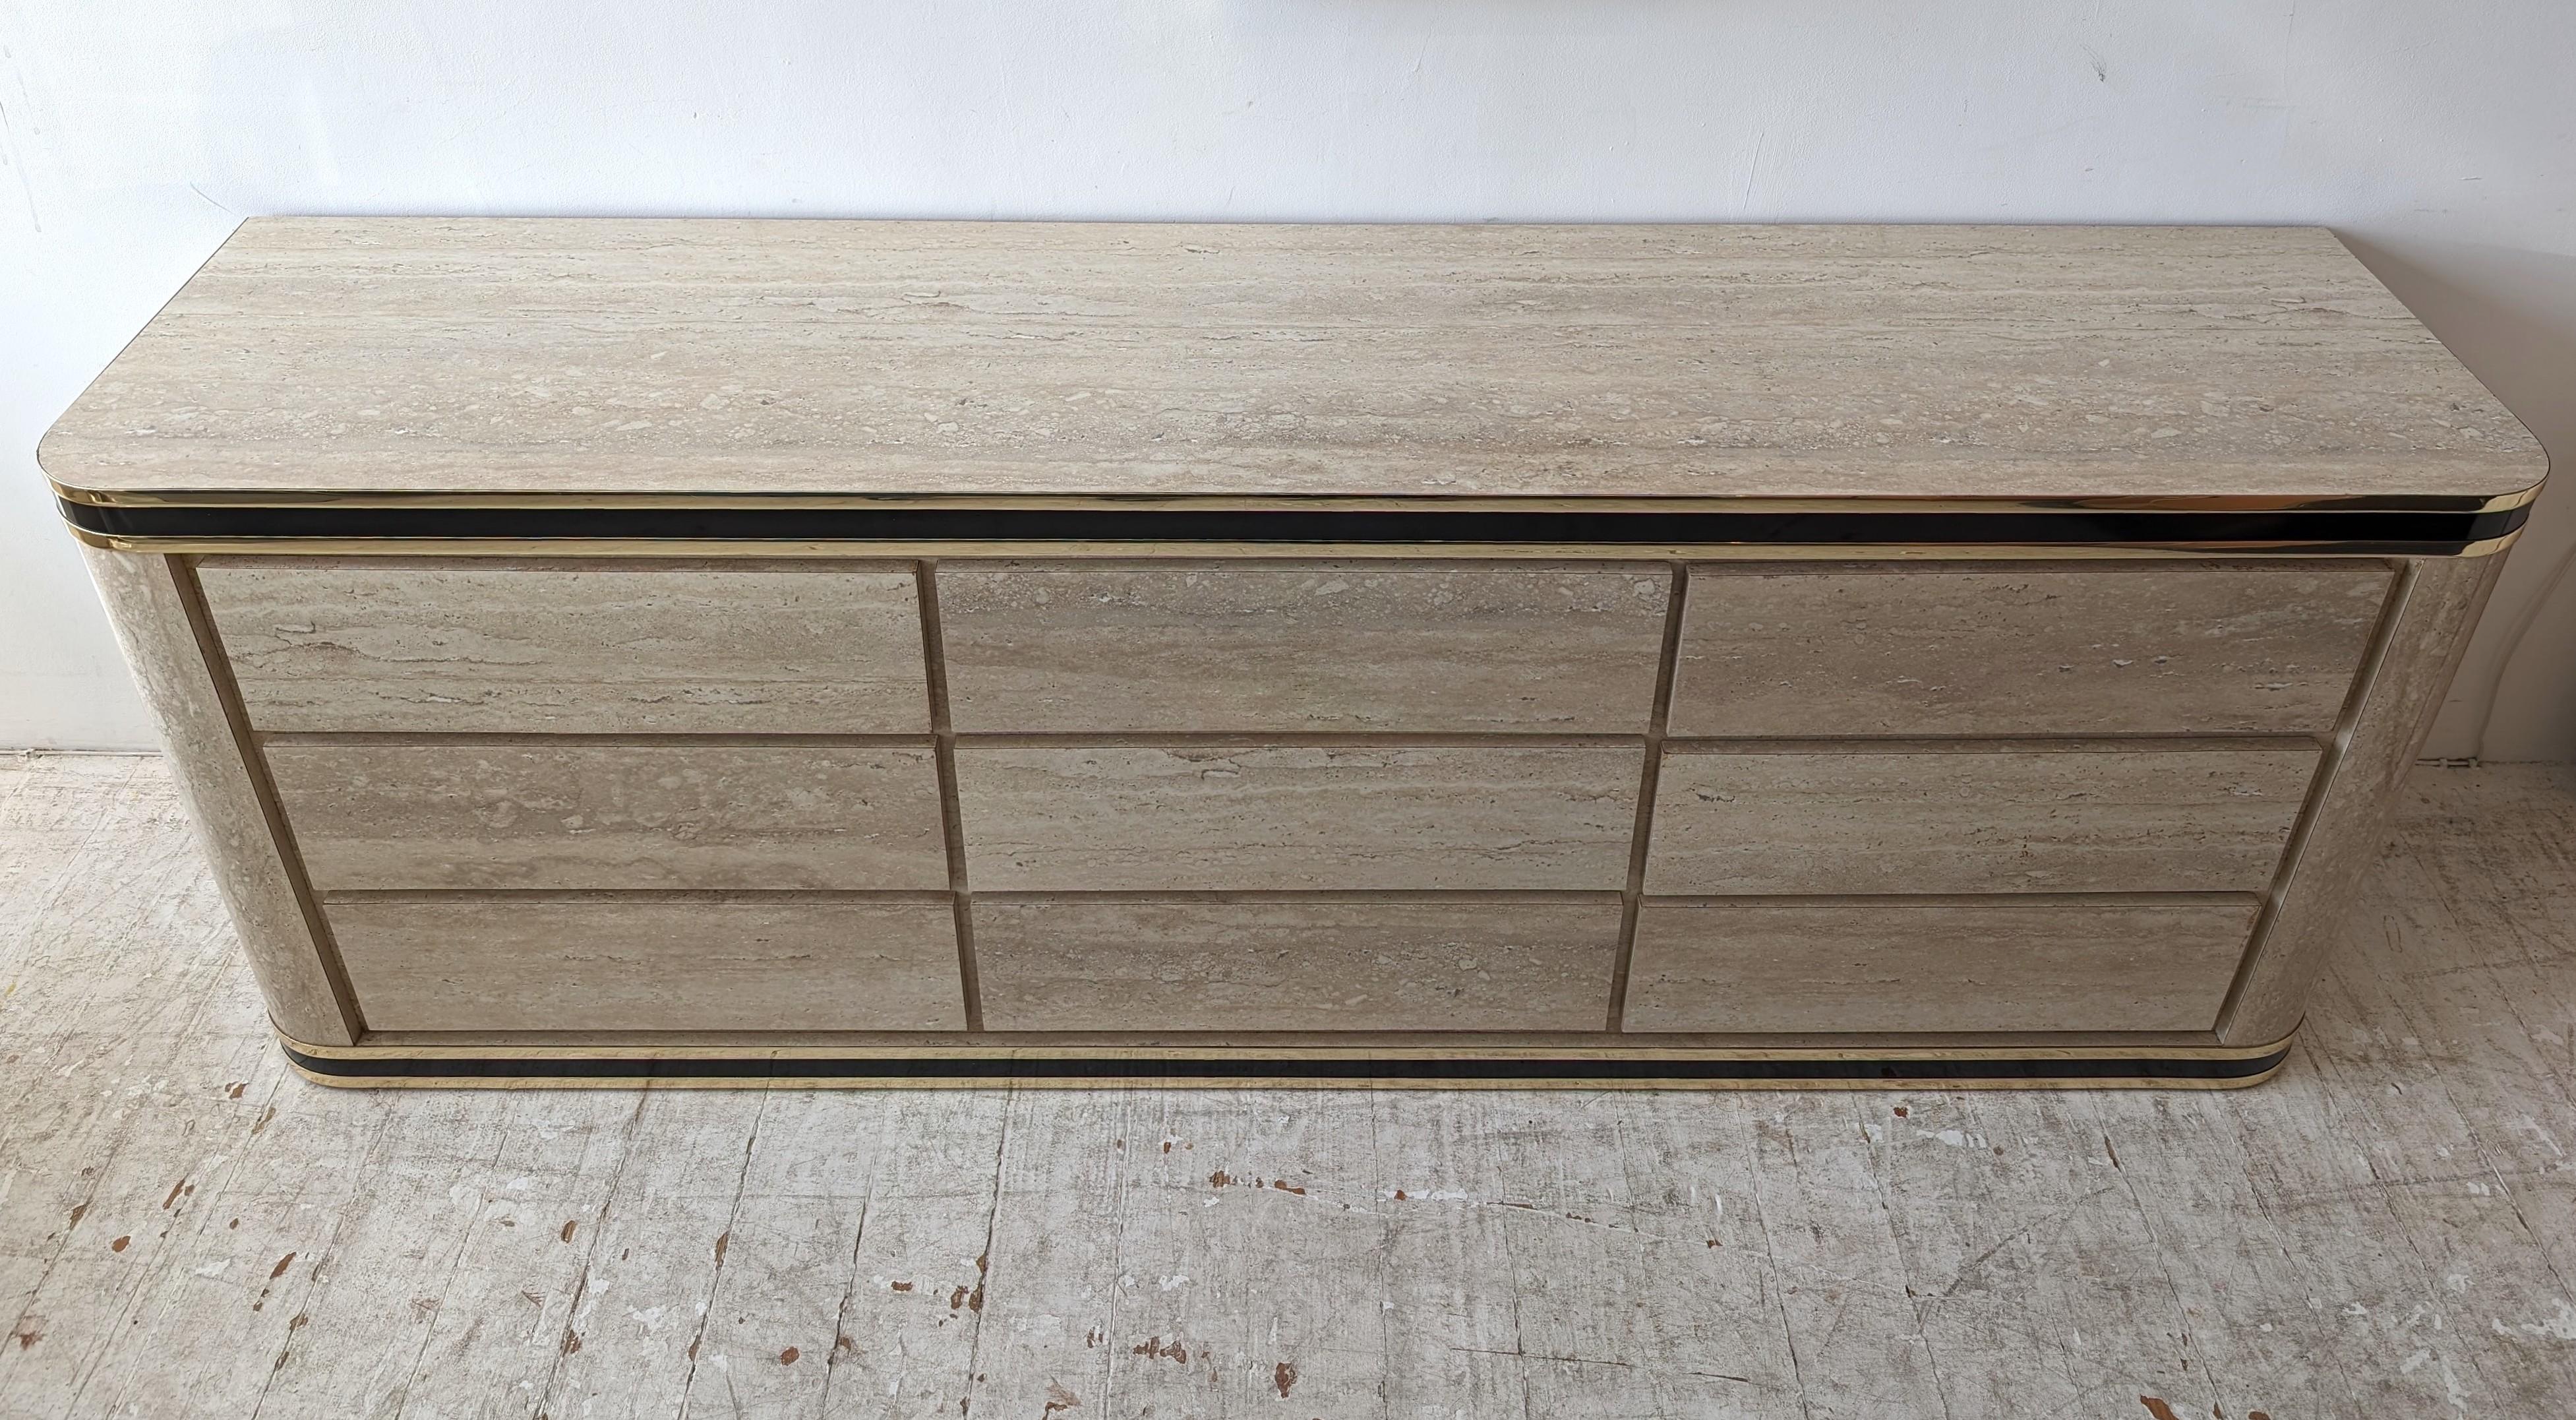 20th Century Vintage 1980s American faux travertine laminate sideboard / dresser with drawers